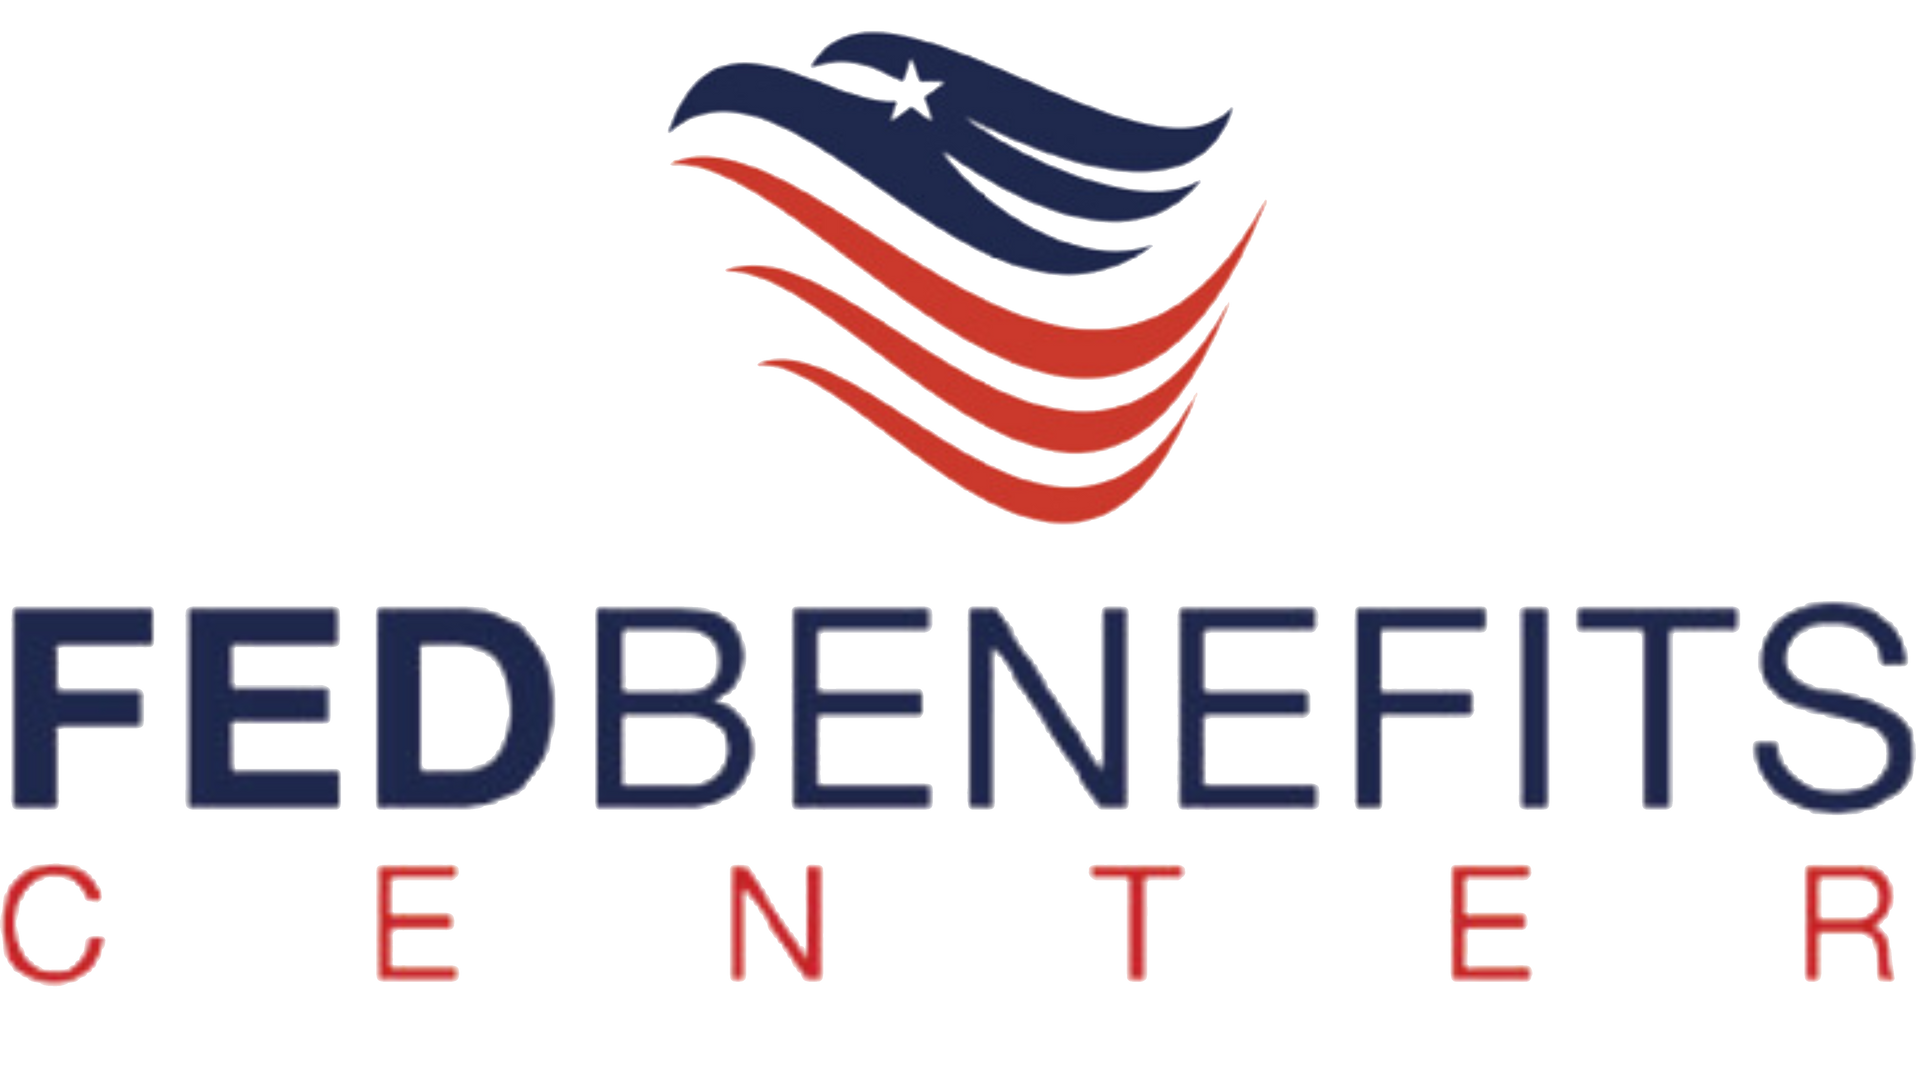 A logo for the fed benefits center with an american flag